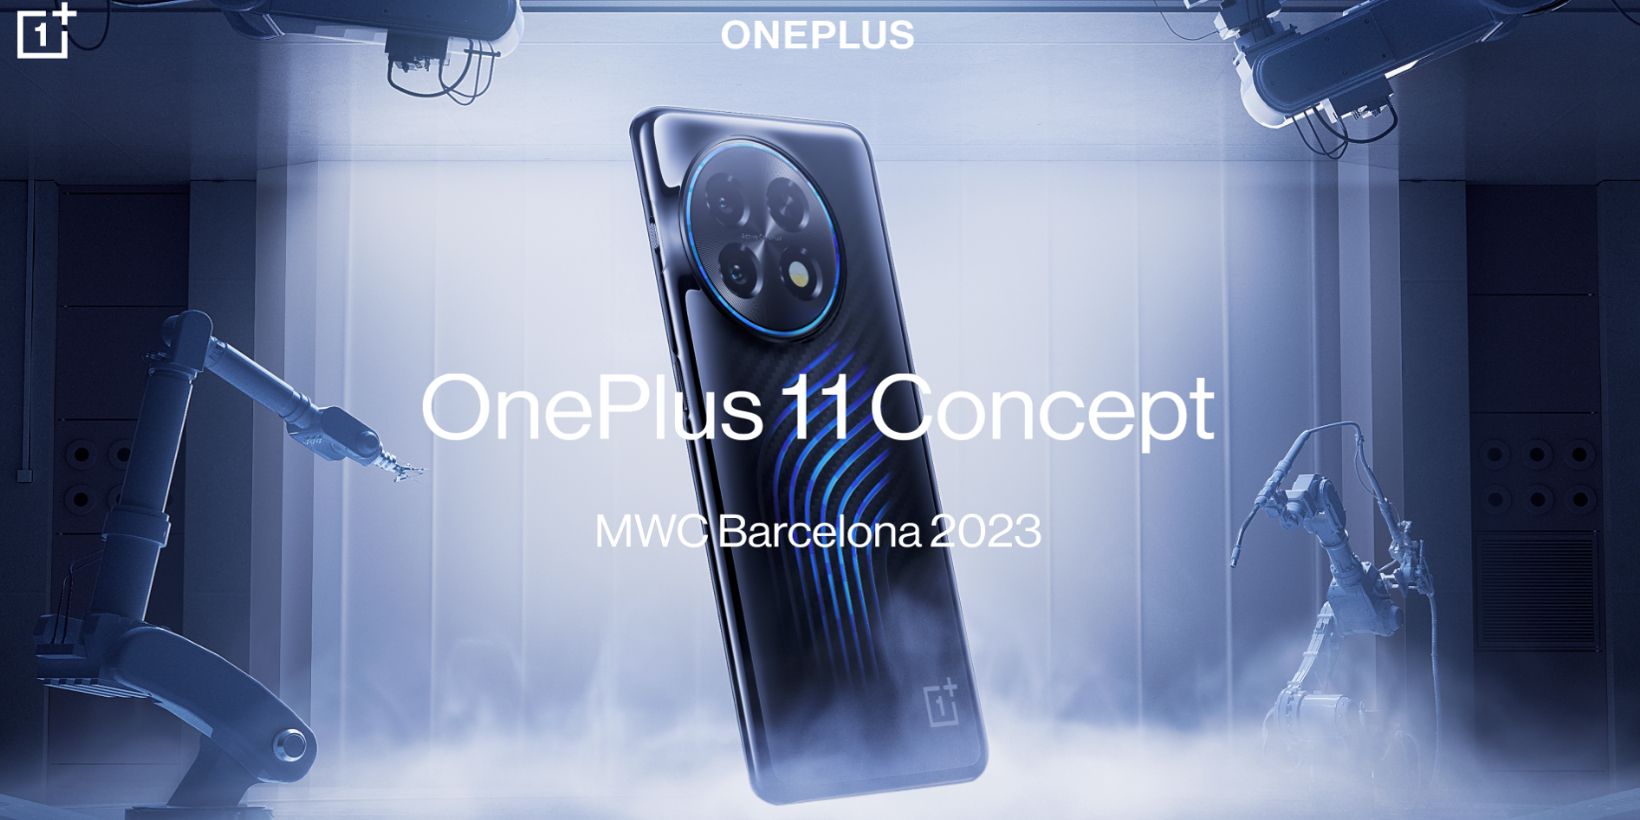 A photo of the OnePlus 11 Concept